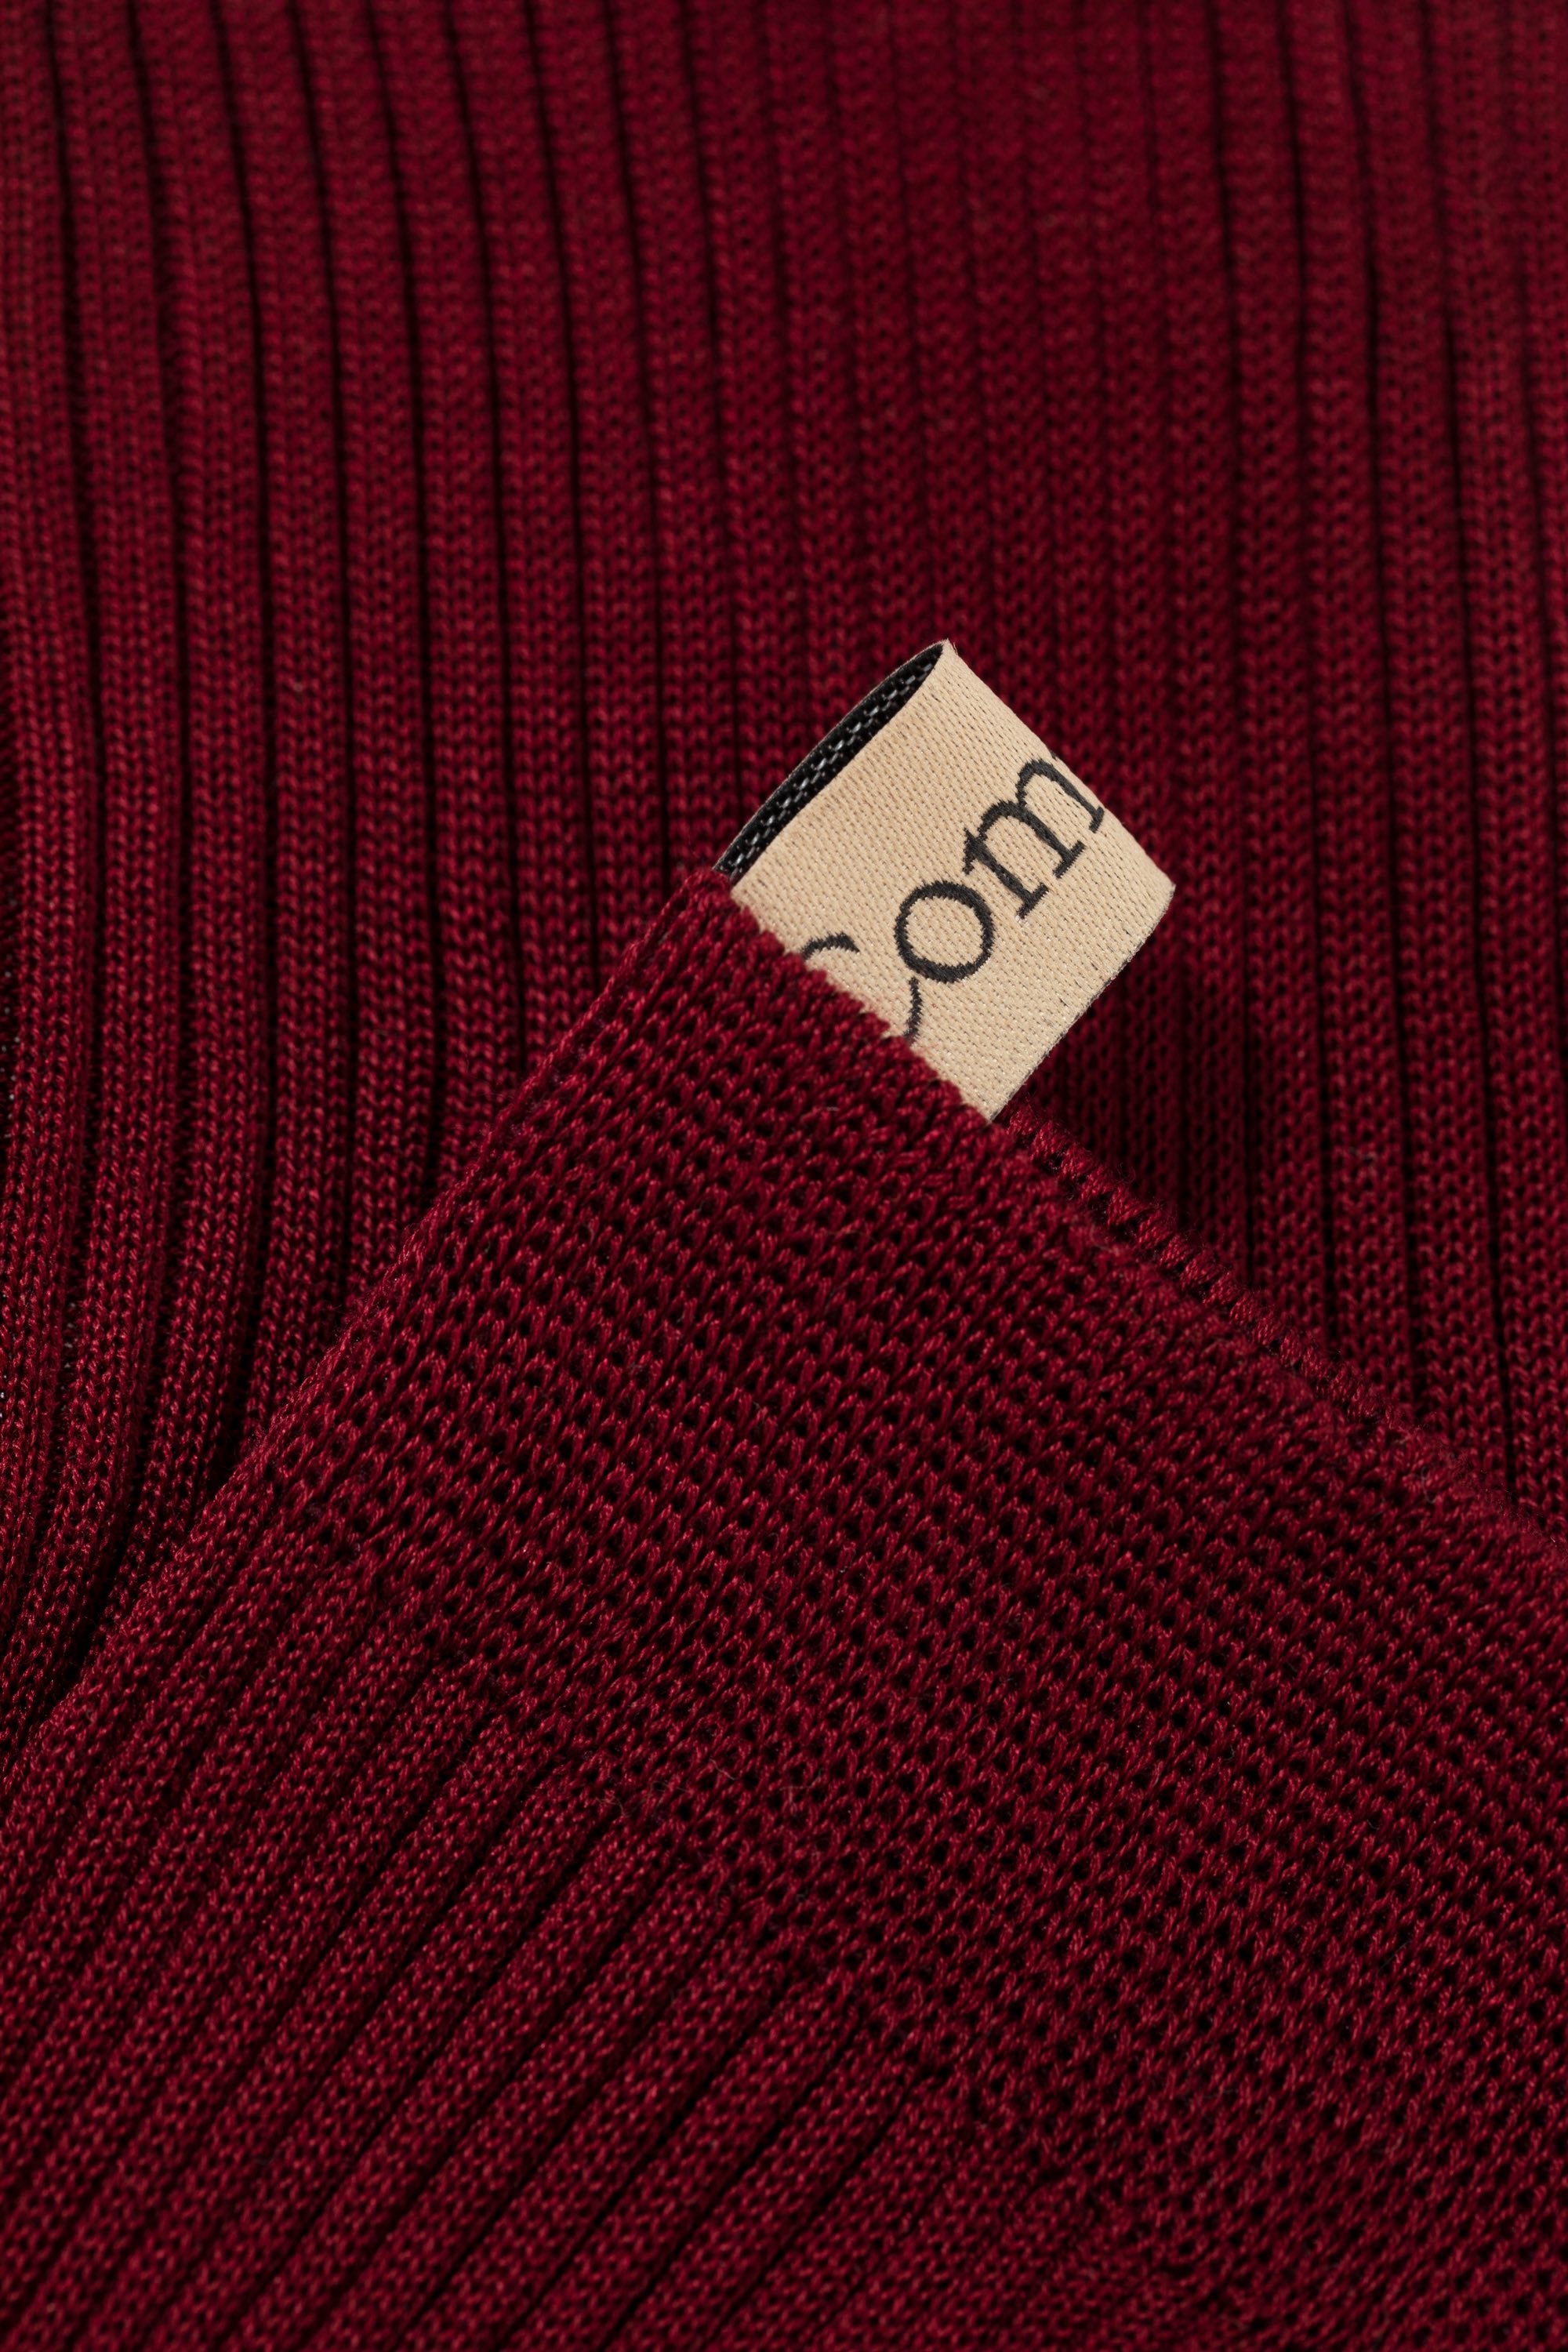 Ribbon tag cuff detail, The Agnelli Sock in Burgundy, by Comme Si